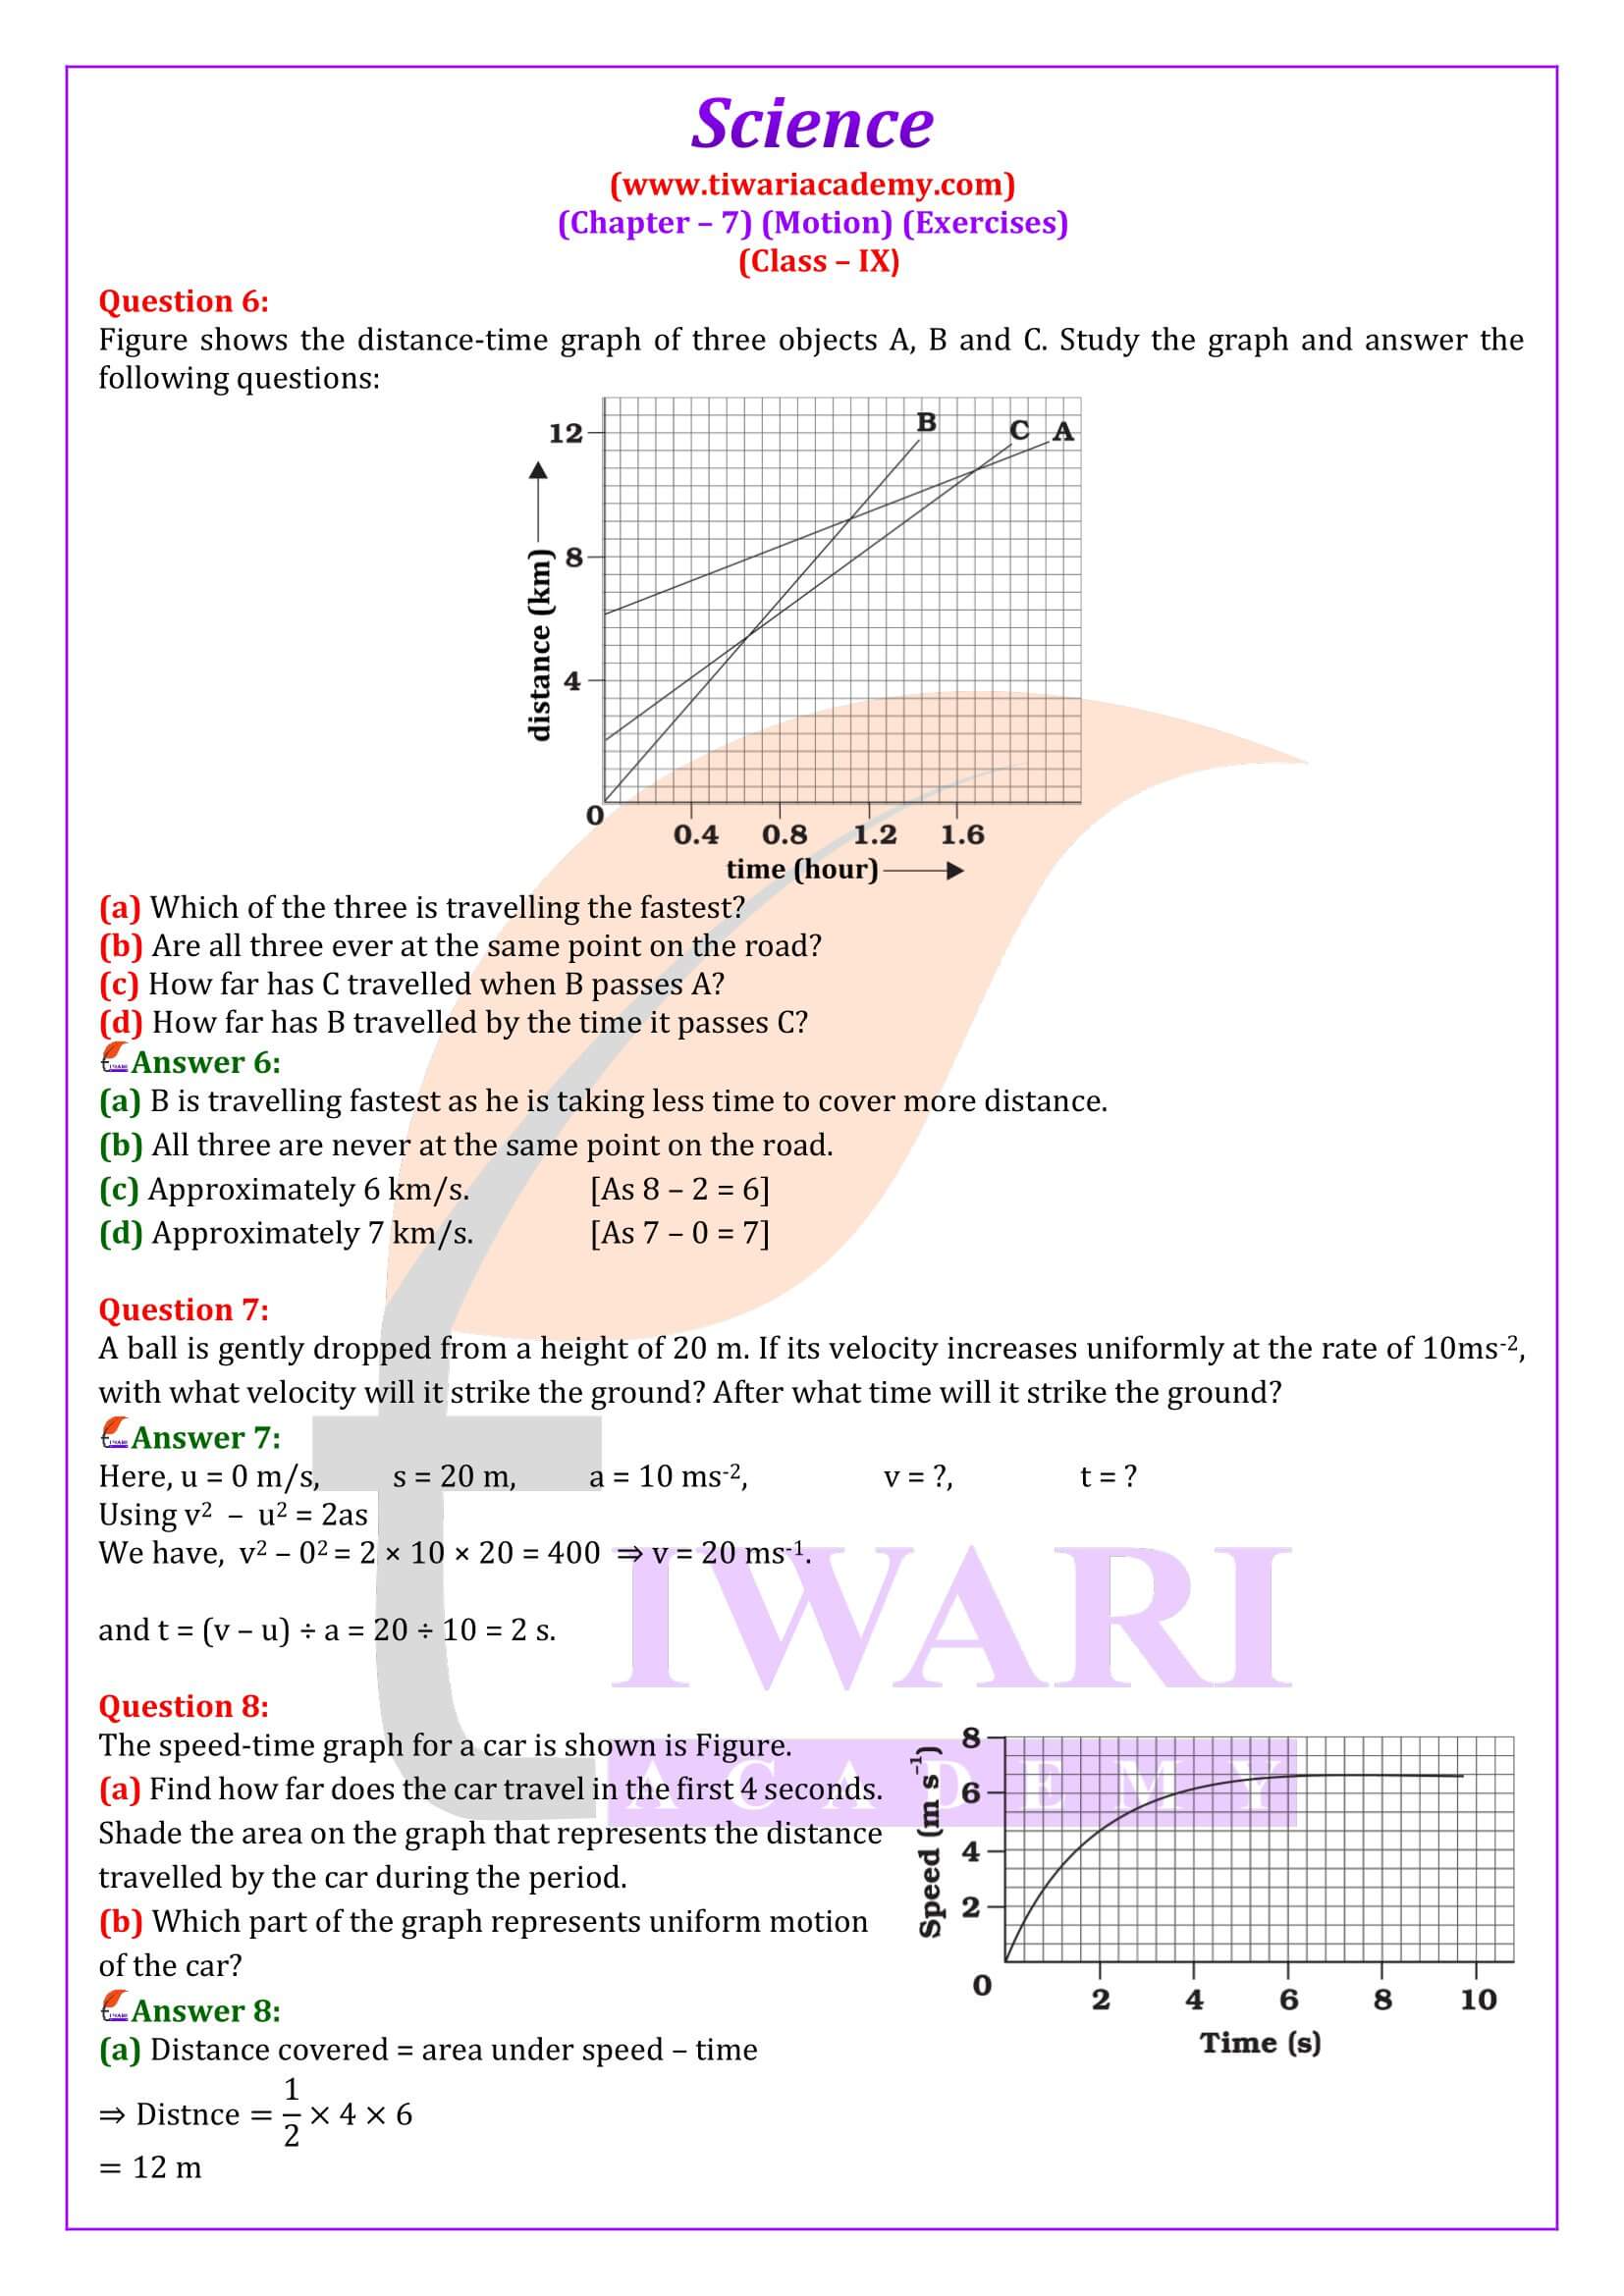 NCERT Solutions for Class 9 Science Chapter 7 Exercises